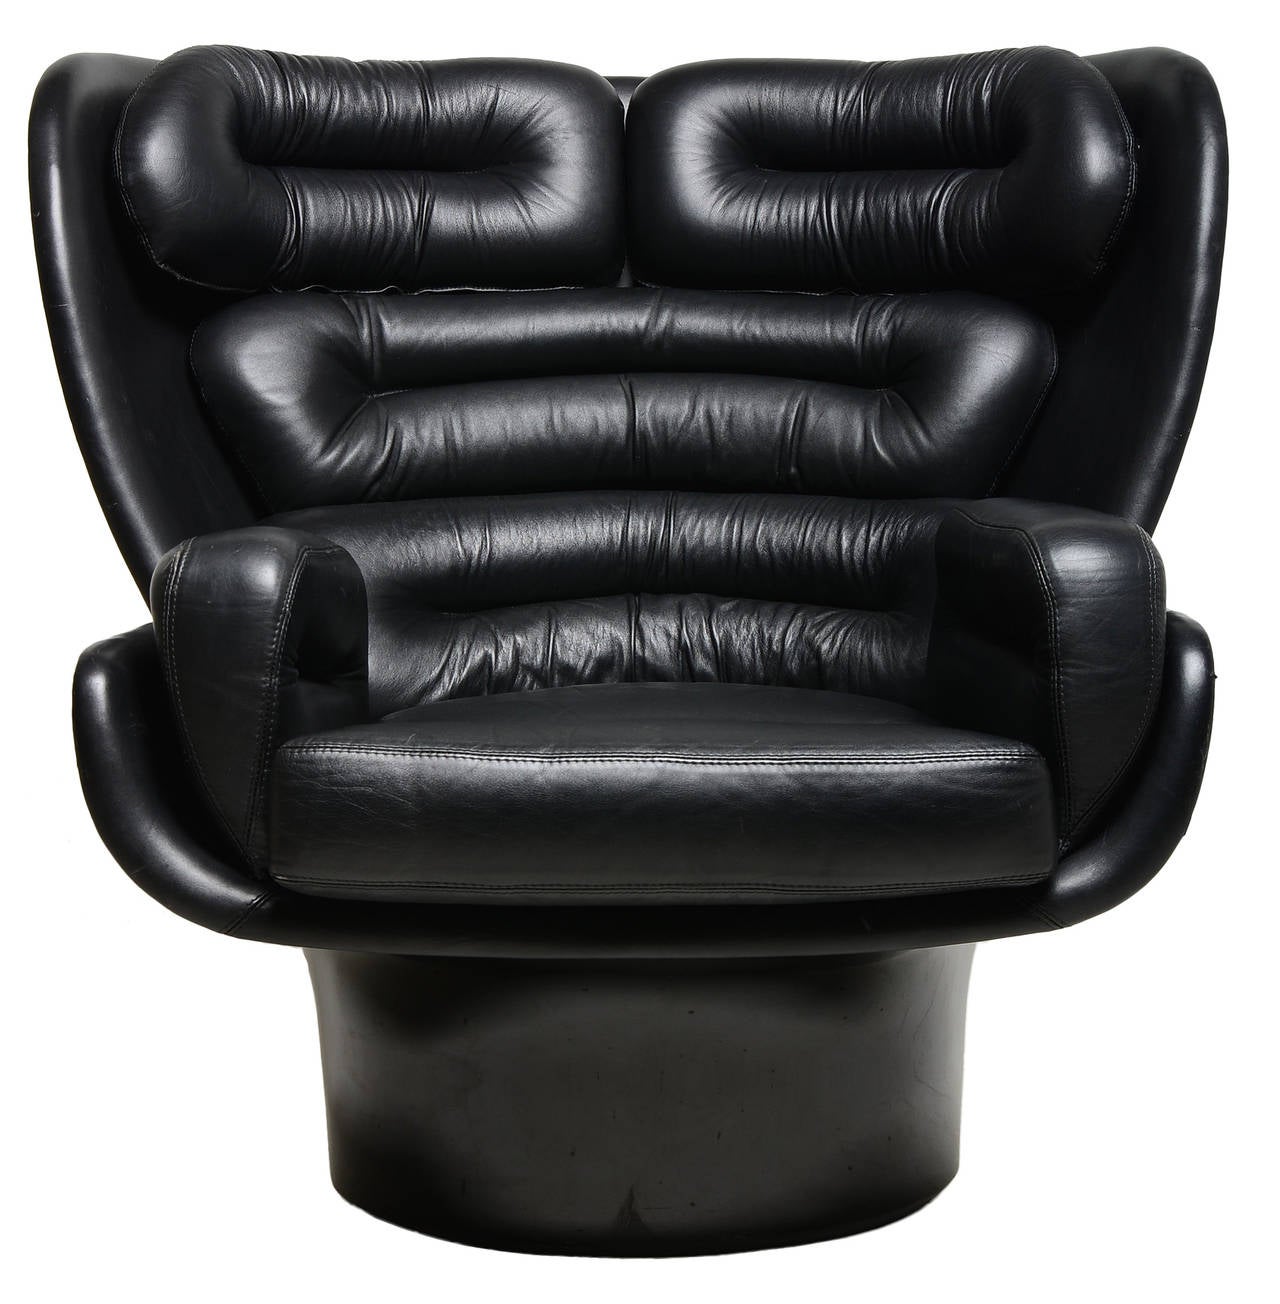 A great example of Joe Colombo's iconic ELDA Loungechair for Comfort, ca. 1963.

Original black leather over a fibreglass shell.   

A feature chair of important and great style.